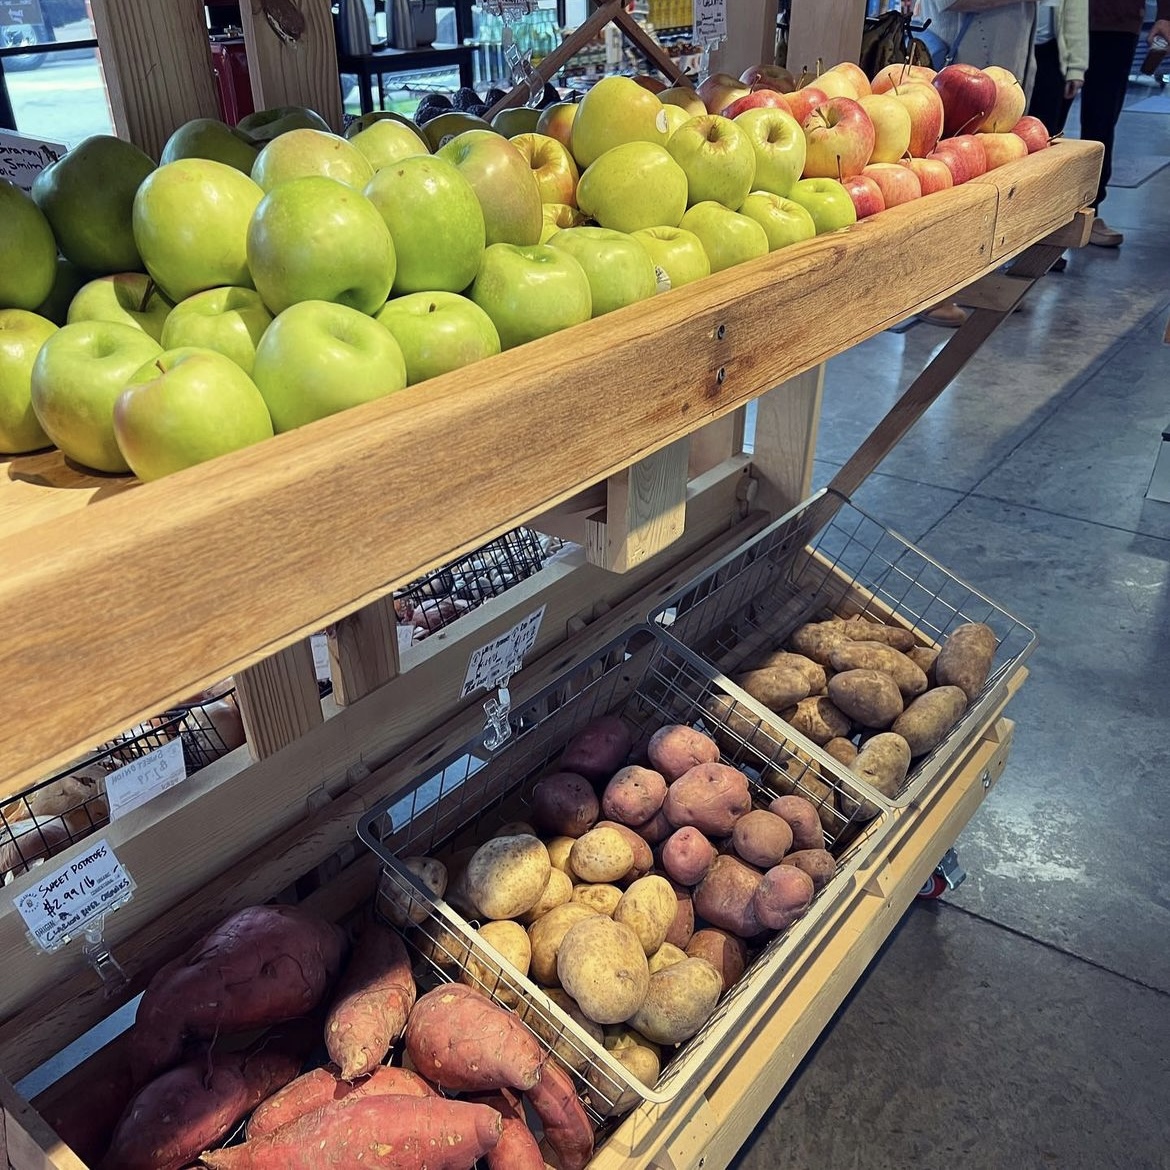 A photo of rows of apples and potatoes available at Millvale Market, a grocery store in Pittsburgh.